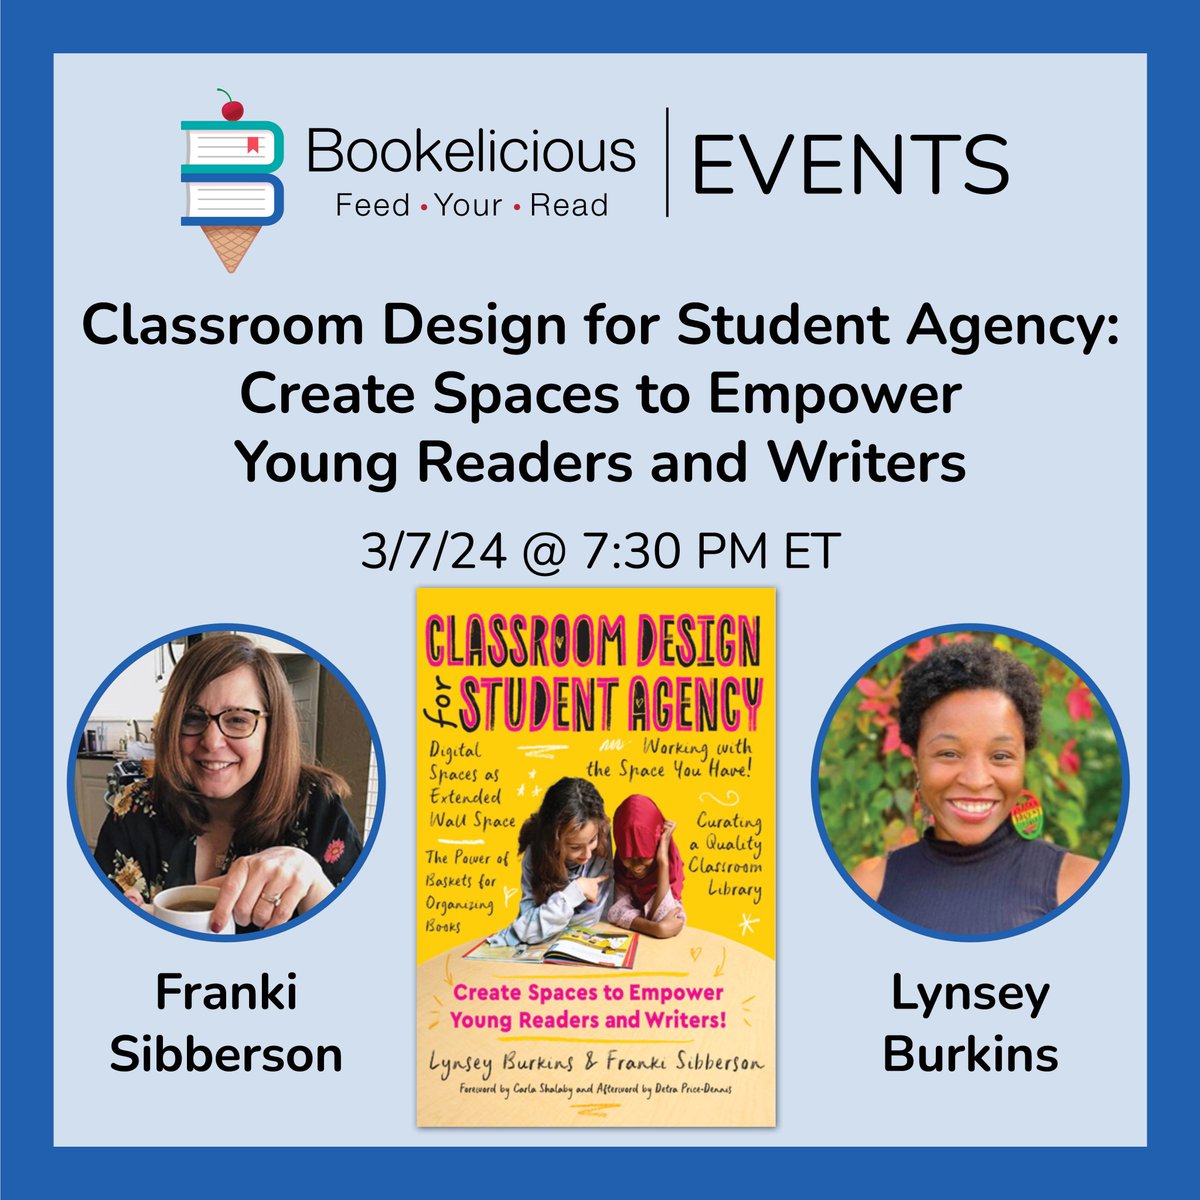 ✍️ Empower readers & writers! 📚 Curate a quality class library! 💪 Develop student agency! Literacy experts and educators @lburkins & @frankisibberson wrote a book with a side of FREE PD! Register: bookelicious.com/events/ '...one of the most...brilliant books I have ever read.'